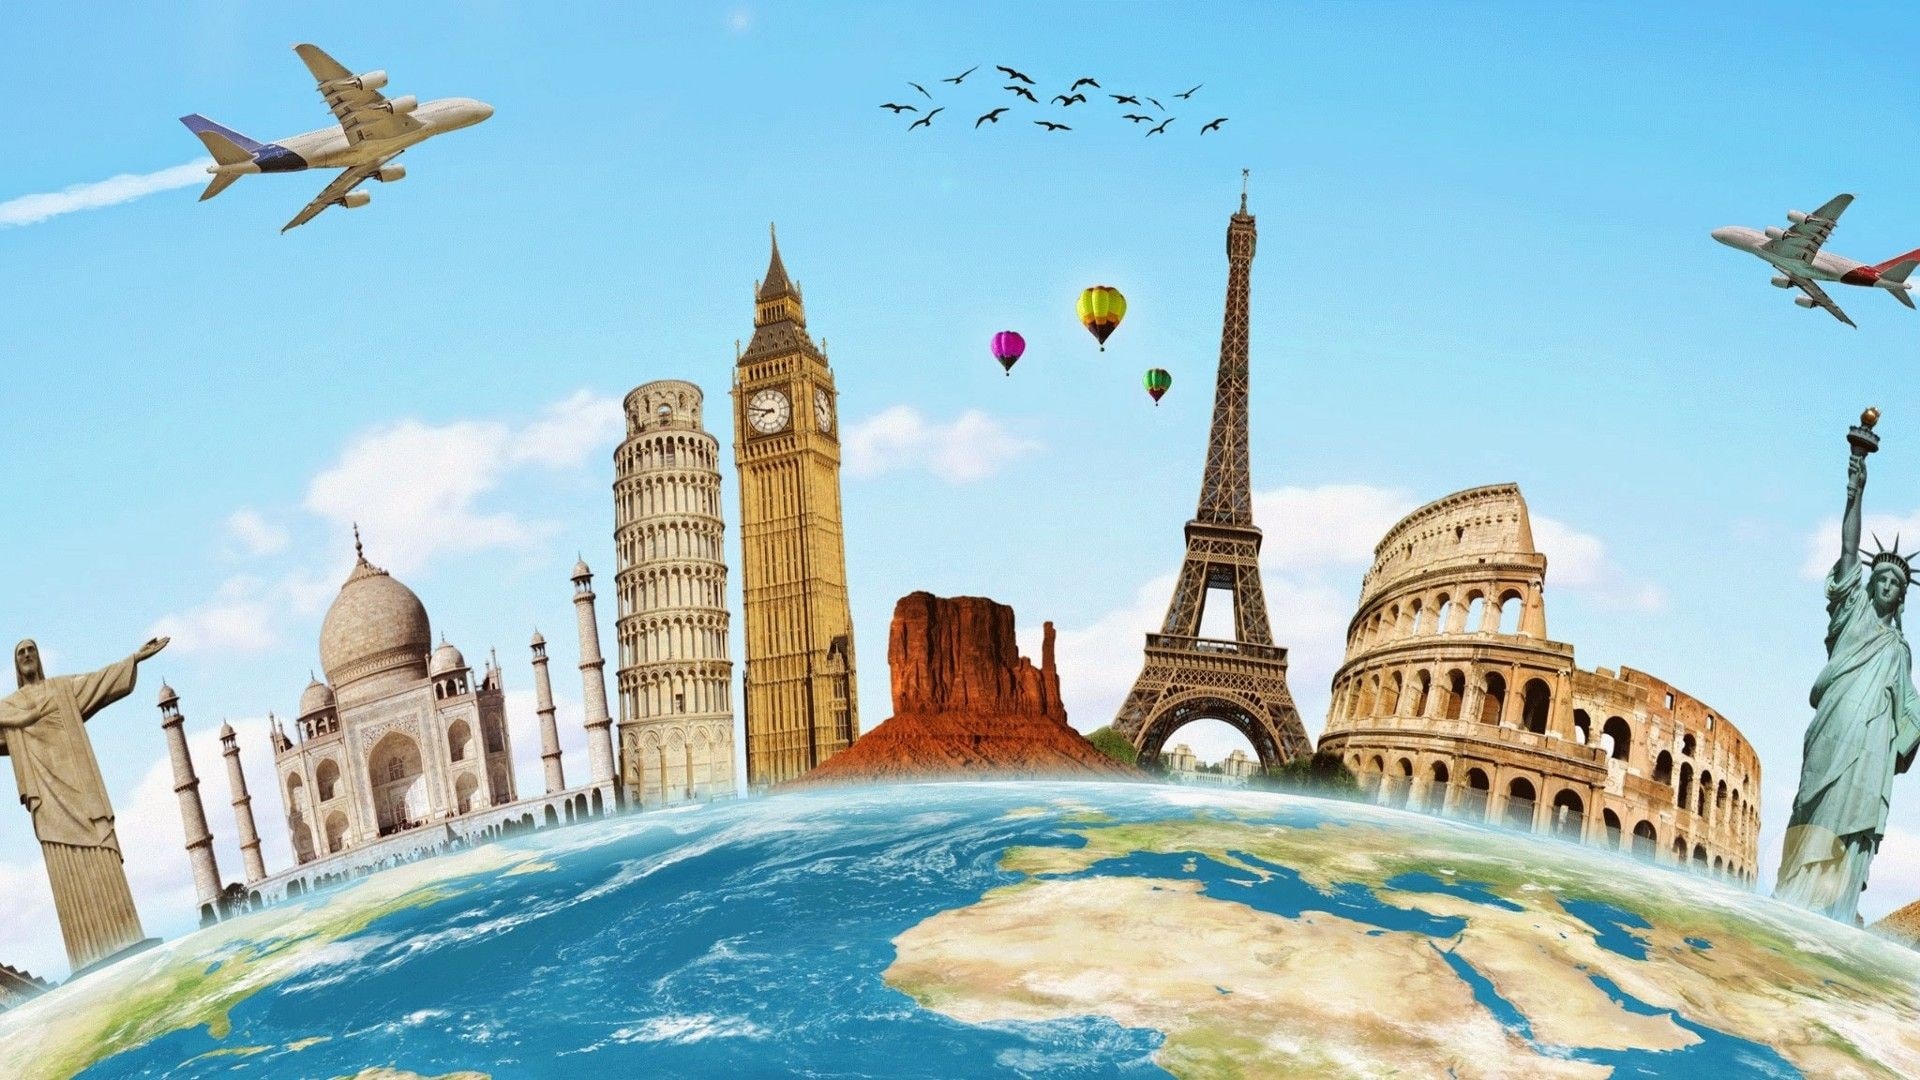 Top 10 Effective Travel Agency Marketing Strategies to Get More Customers